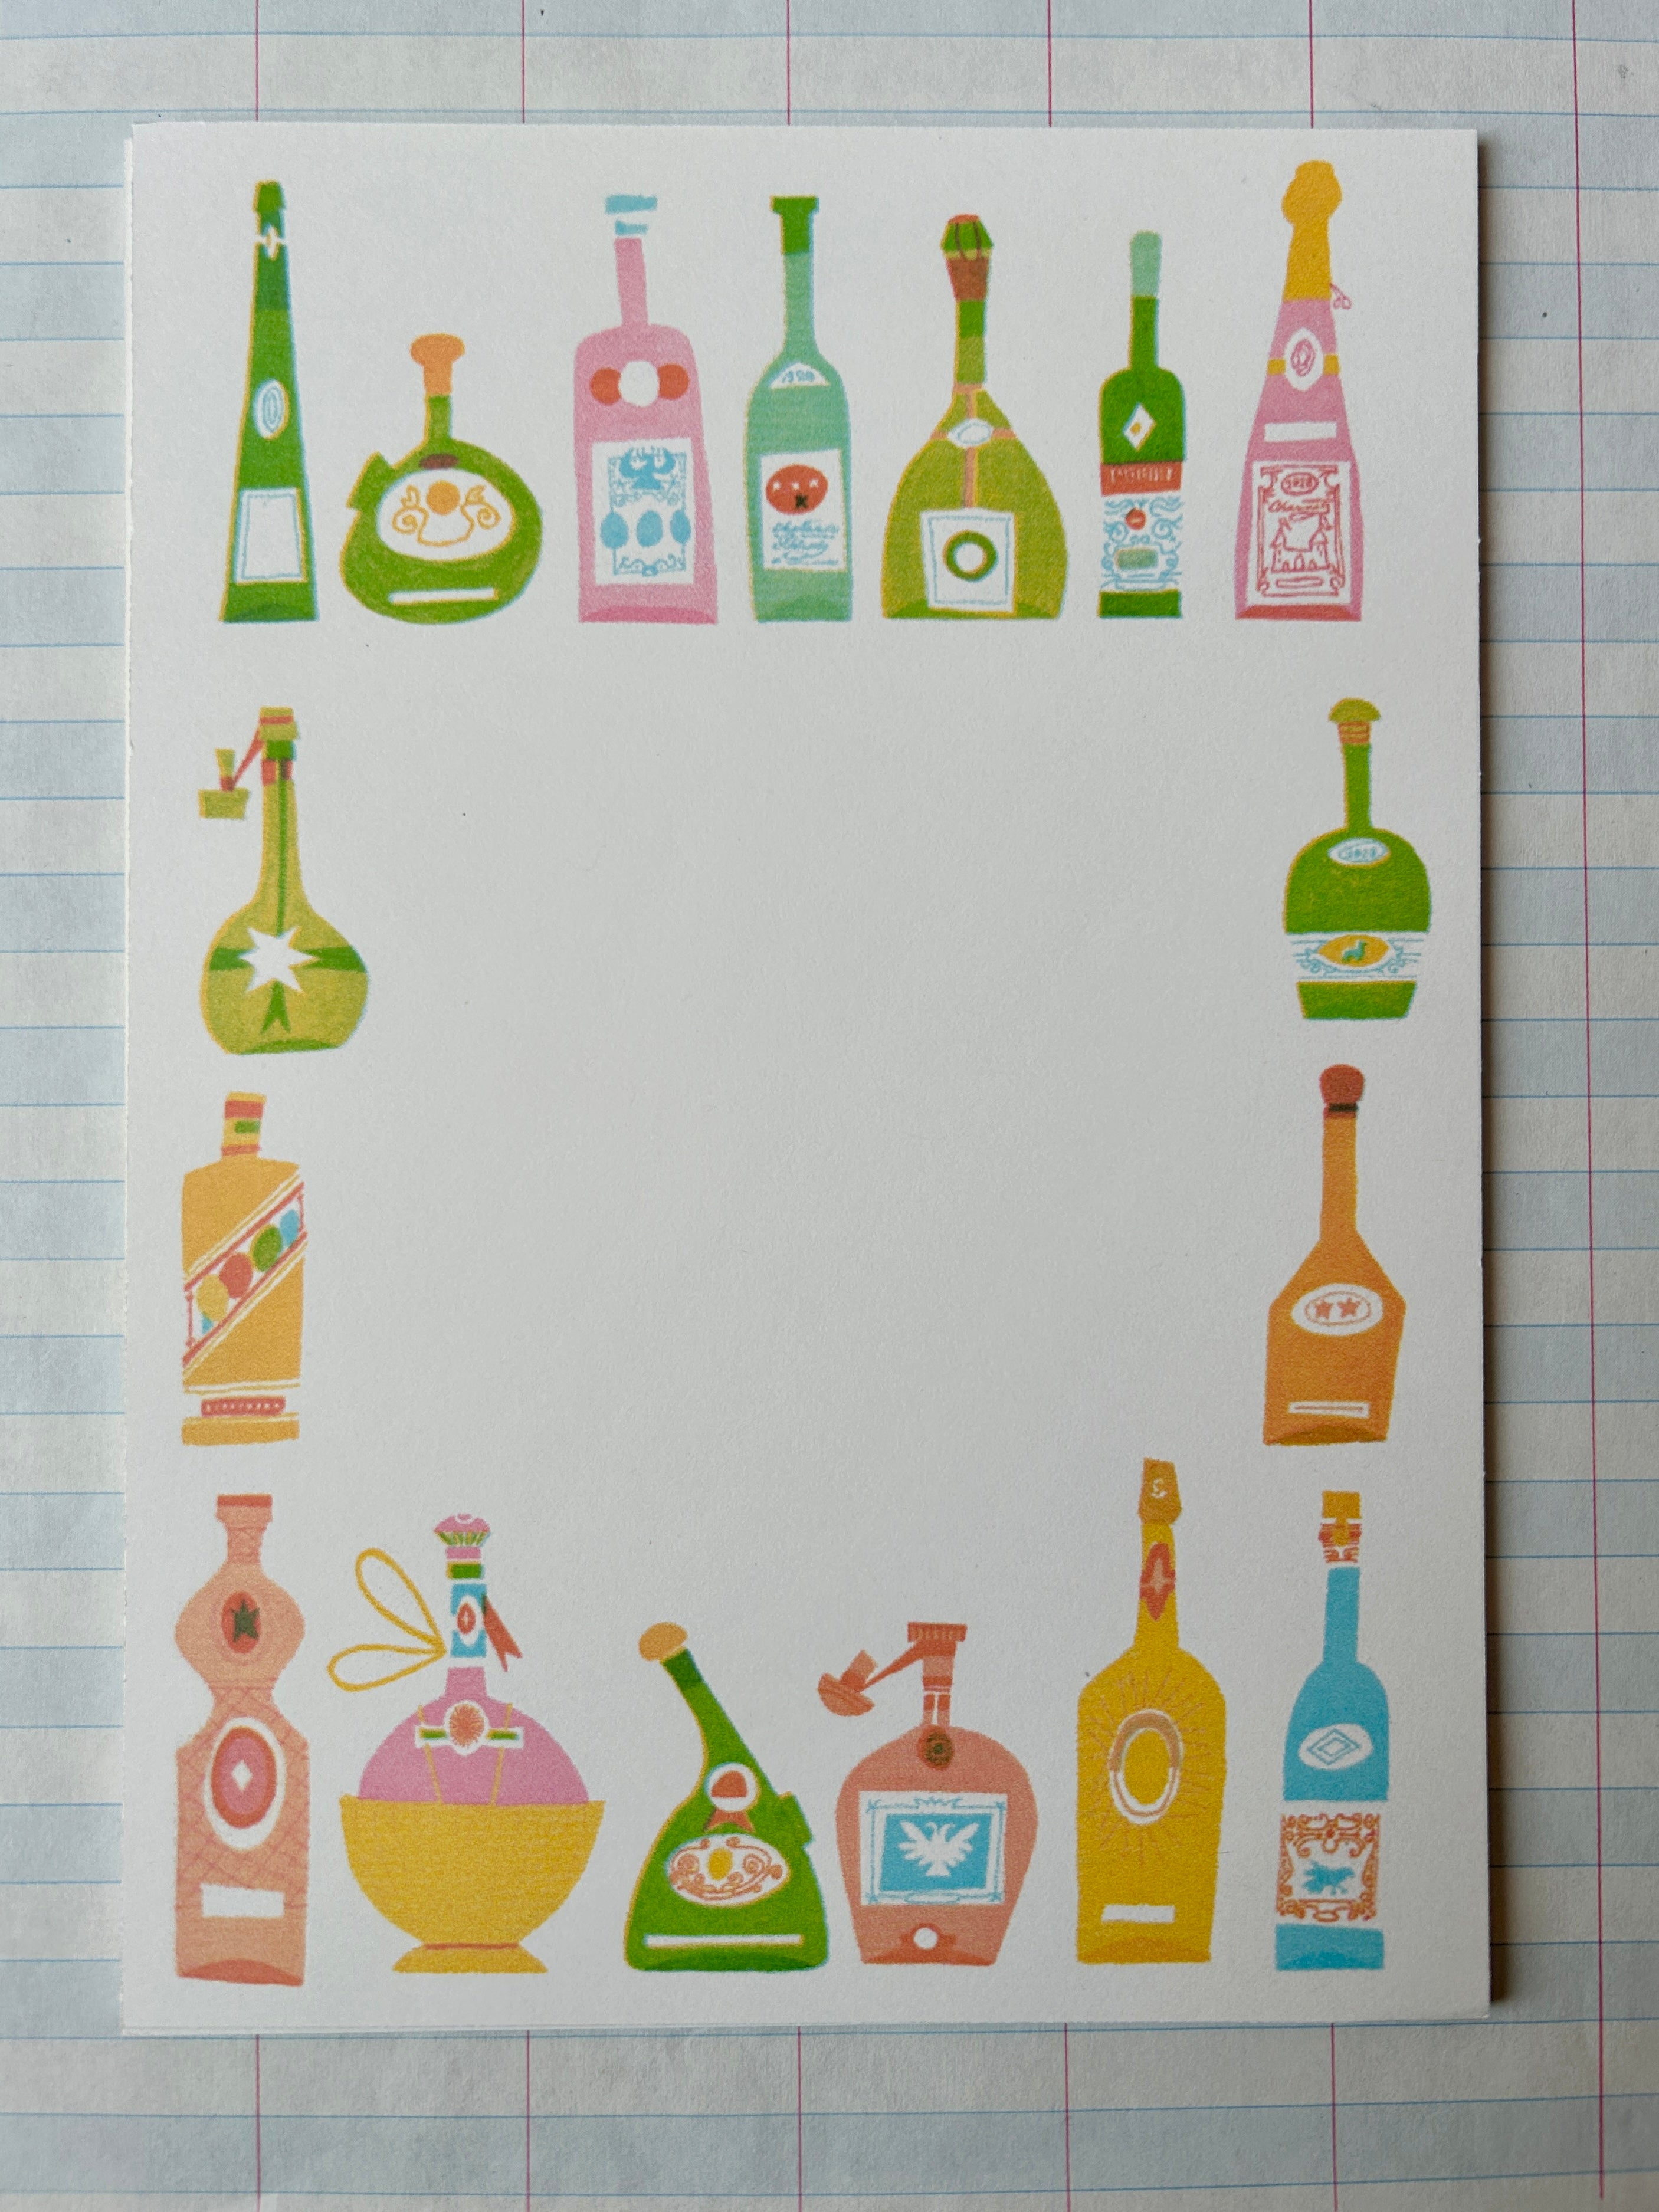 On the Bar Cart Stationery